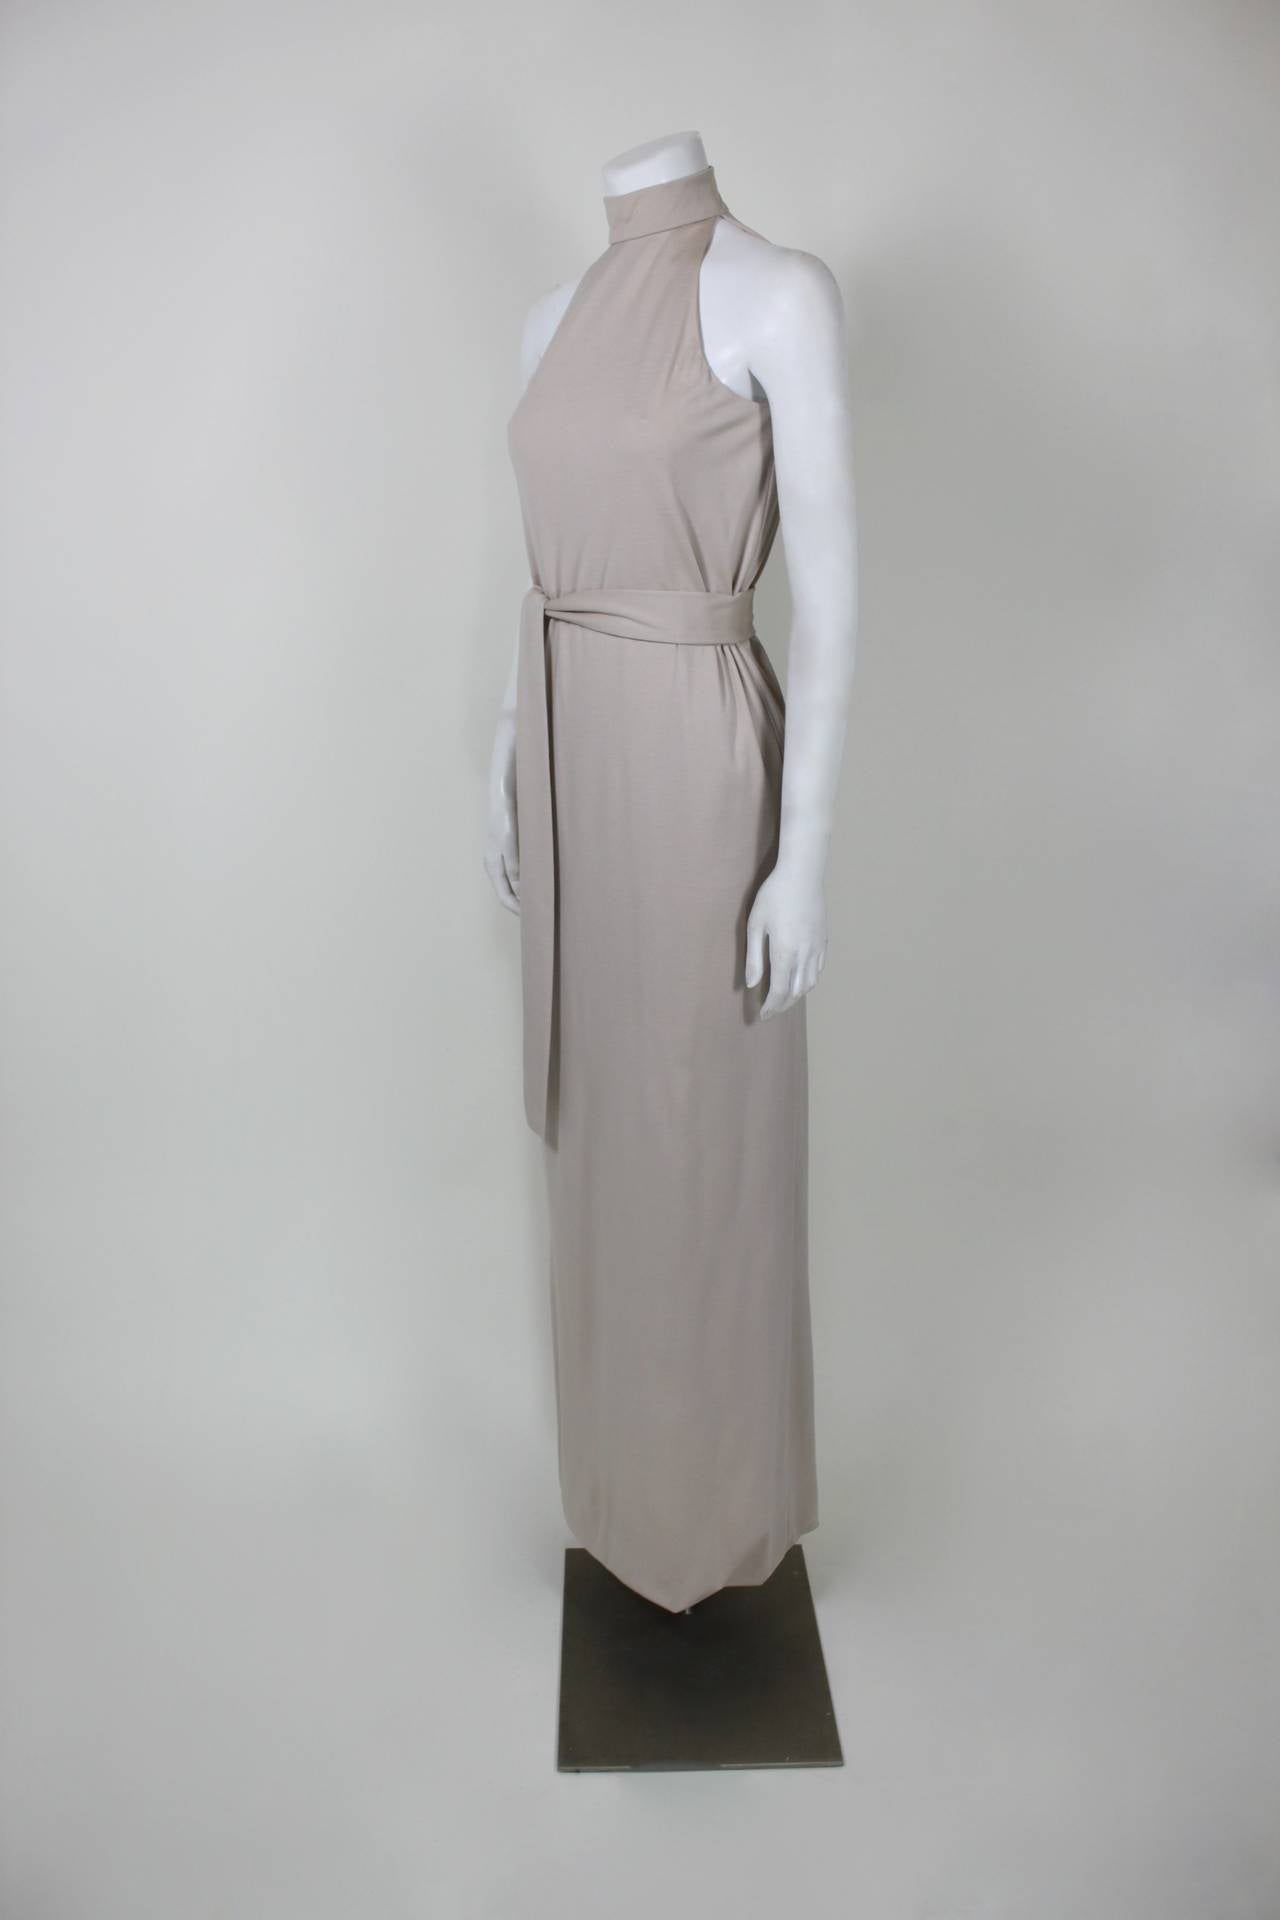 Norman Norell 1970s Cream Wool Evening Gown In New Condition For Sale In Los Angeles, CA